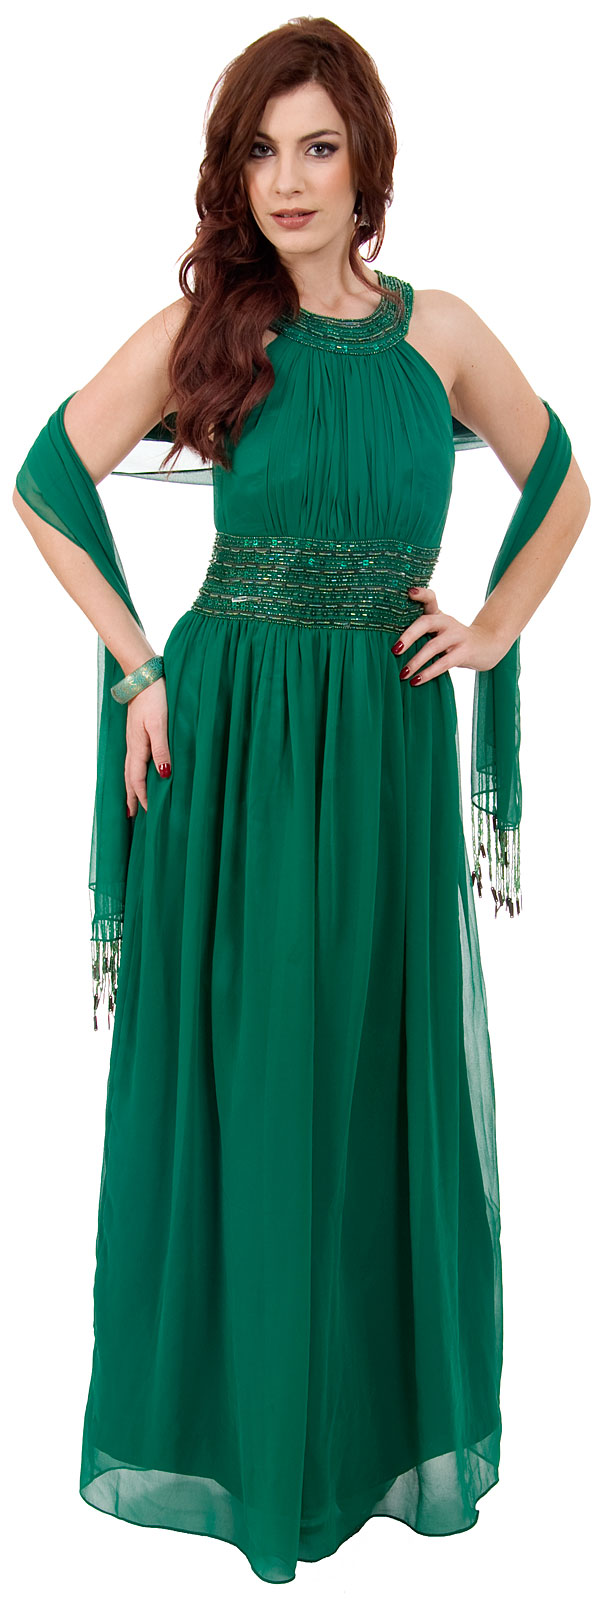 Image of Roman Empire Long Formal Dress With Beaded Straps & Waist in alternative picture